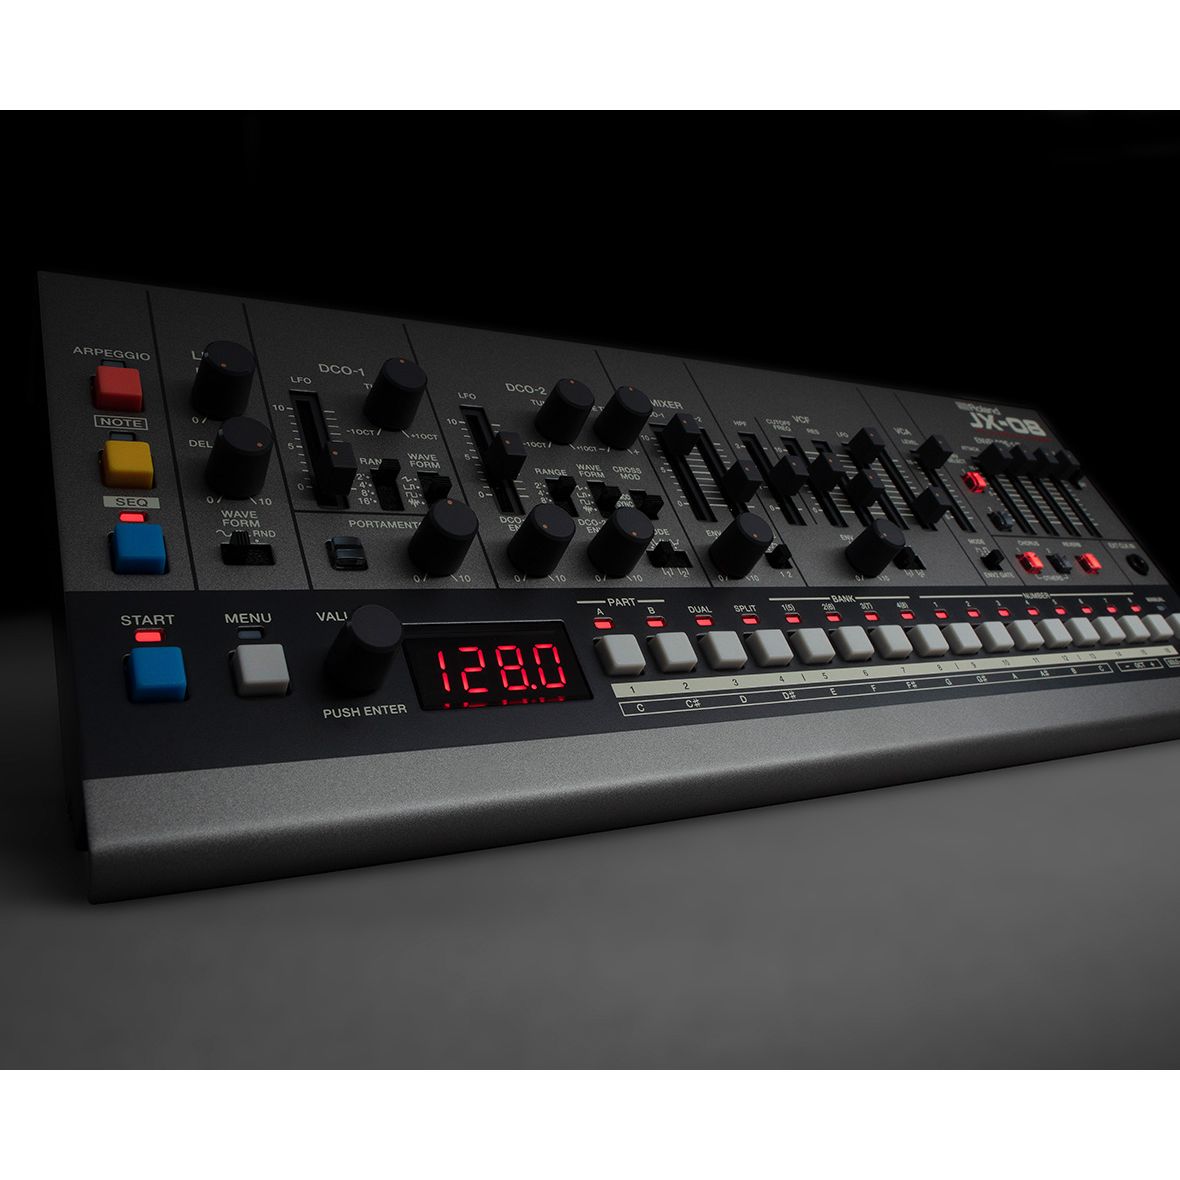 Omega Music  ROLAND JX-08 Synthé Analogique